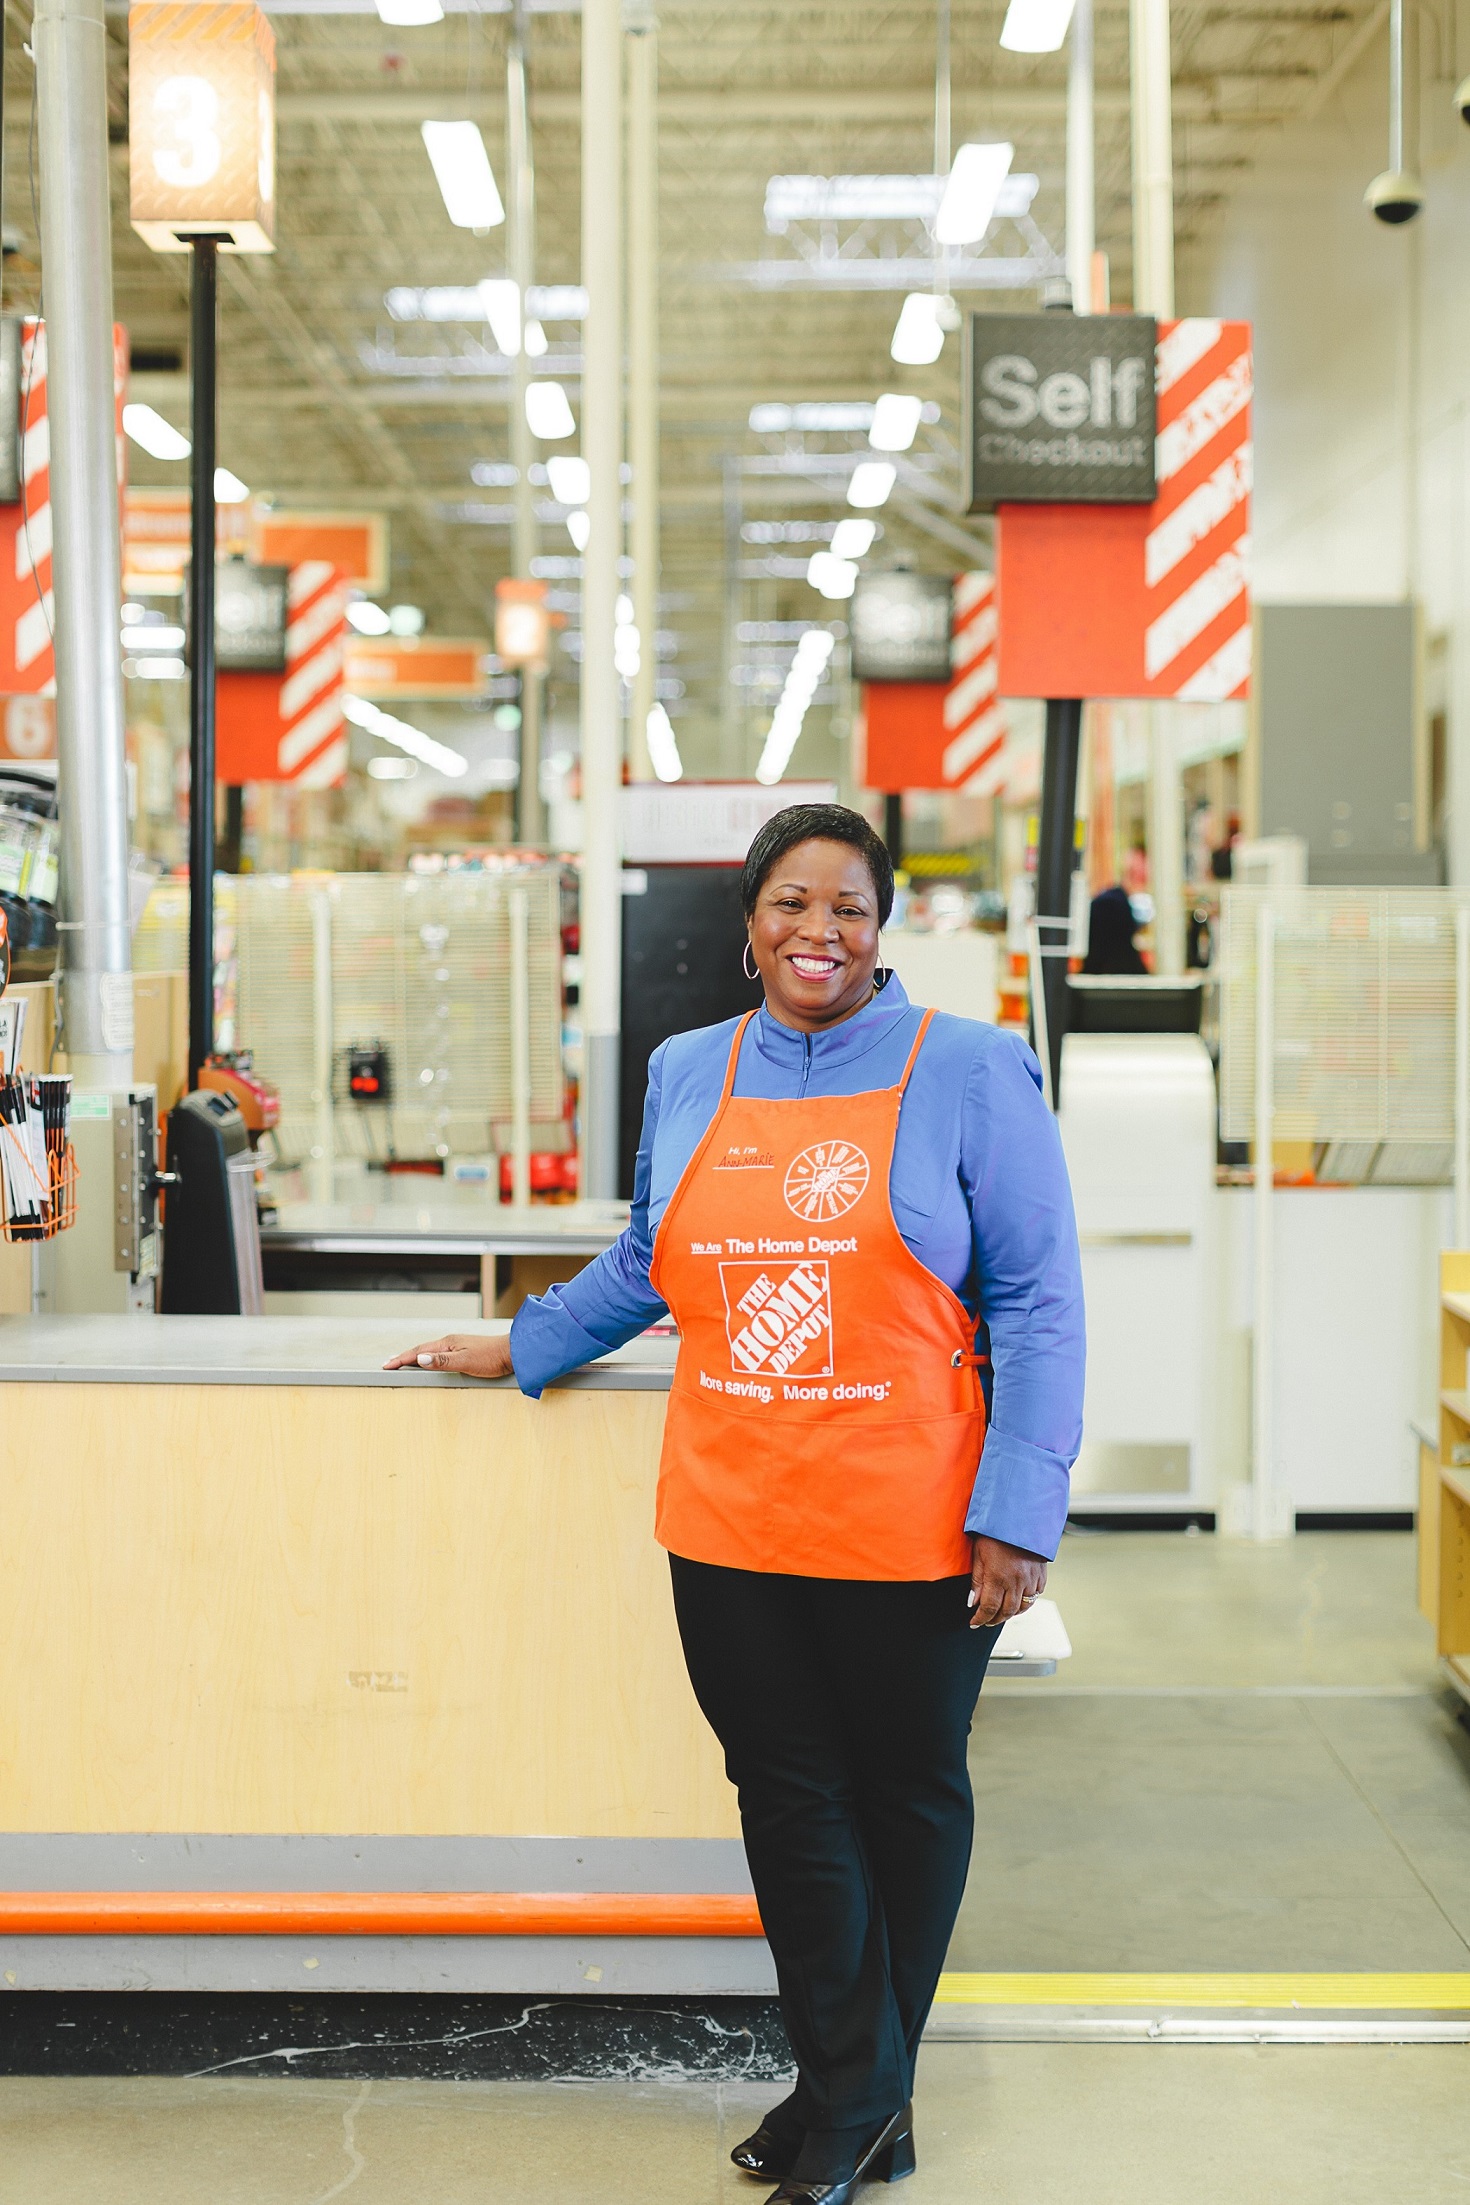 Home Depot and MakerBot to Expand Their In-Store Pilot Program to ...